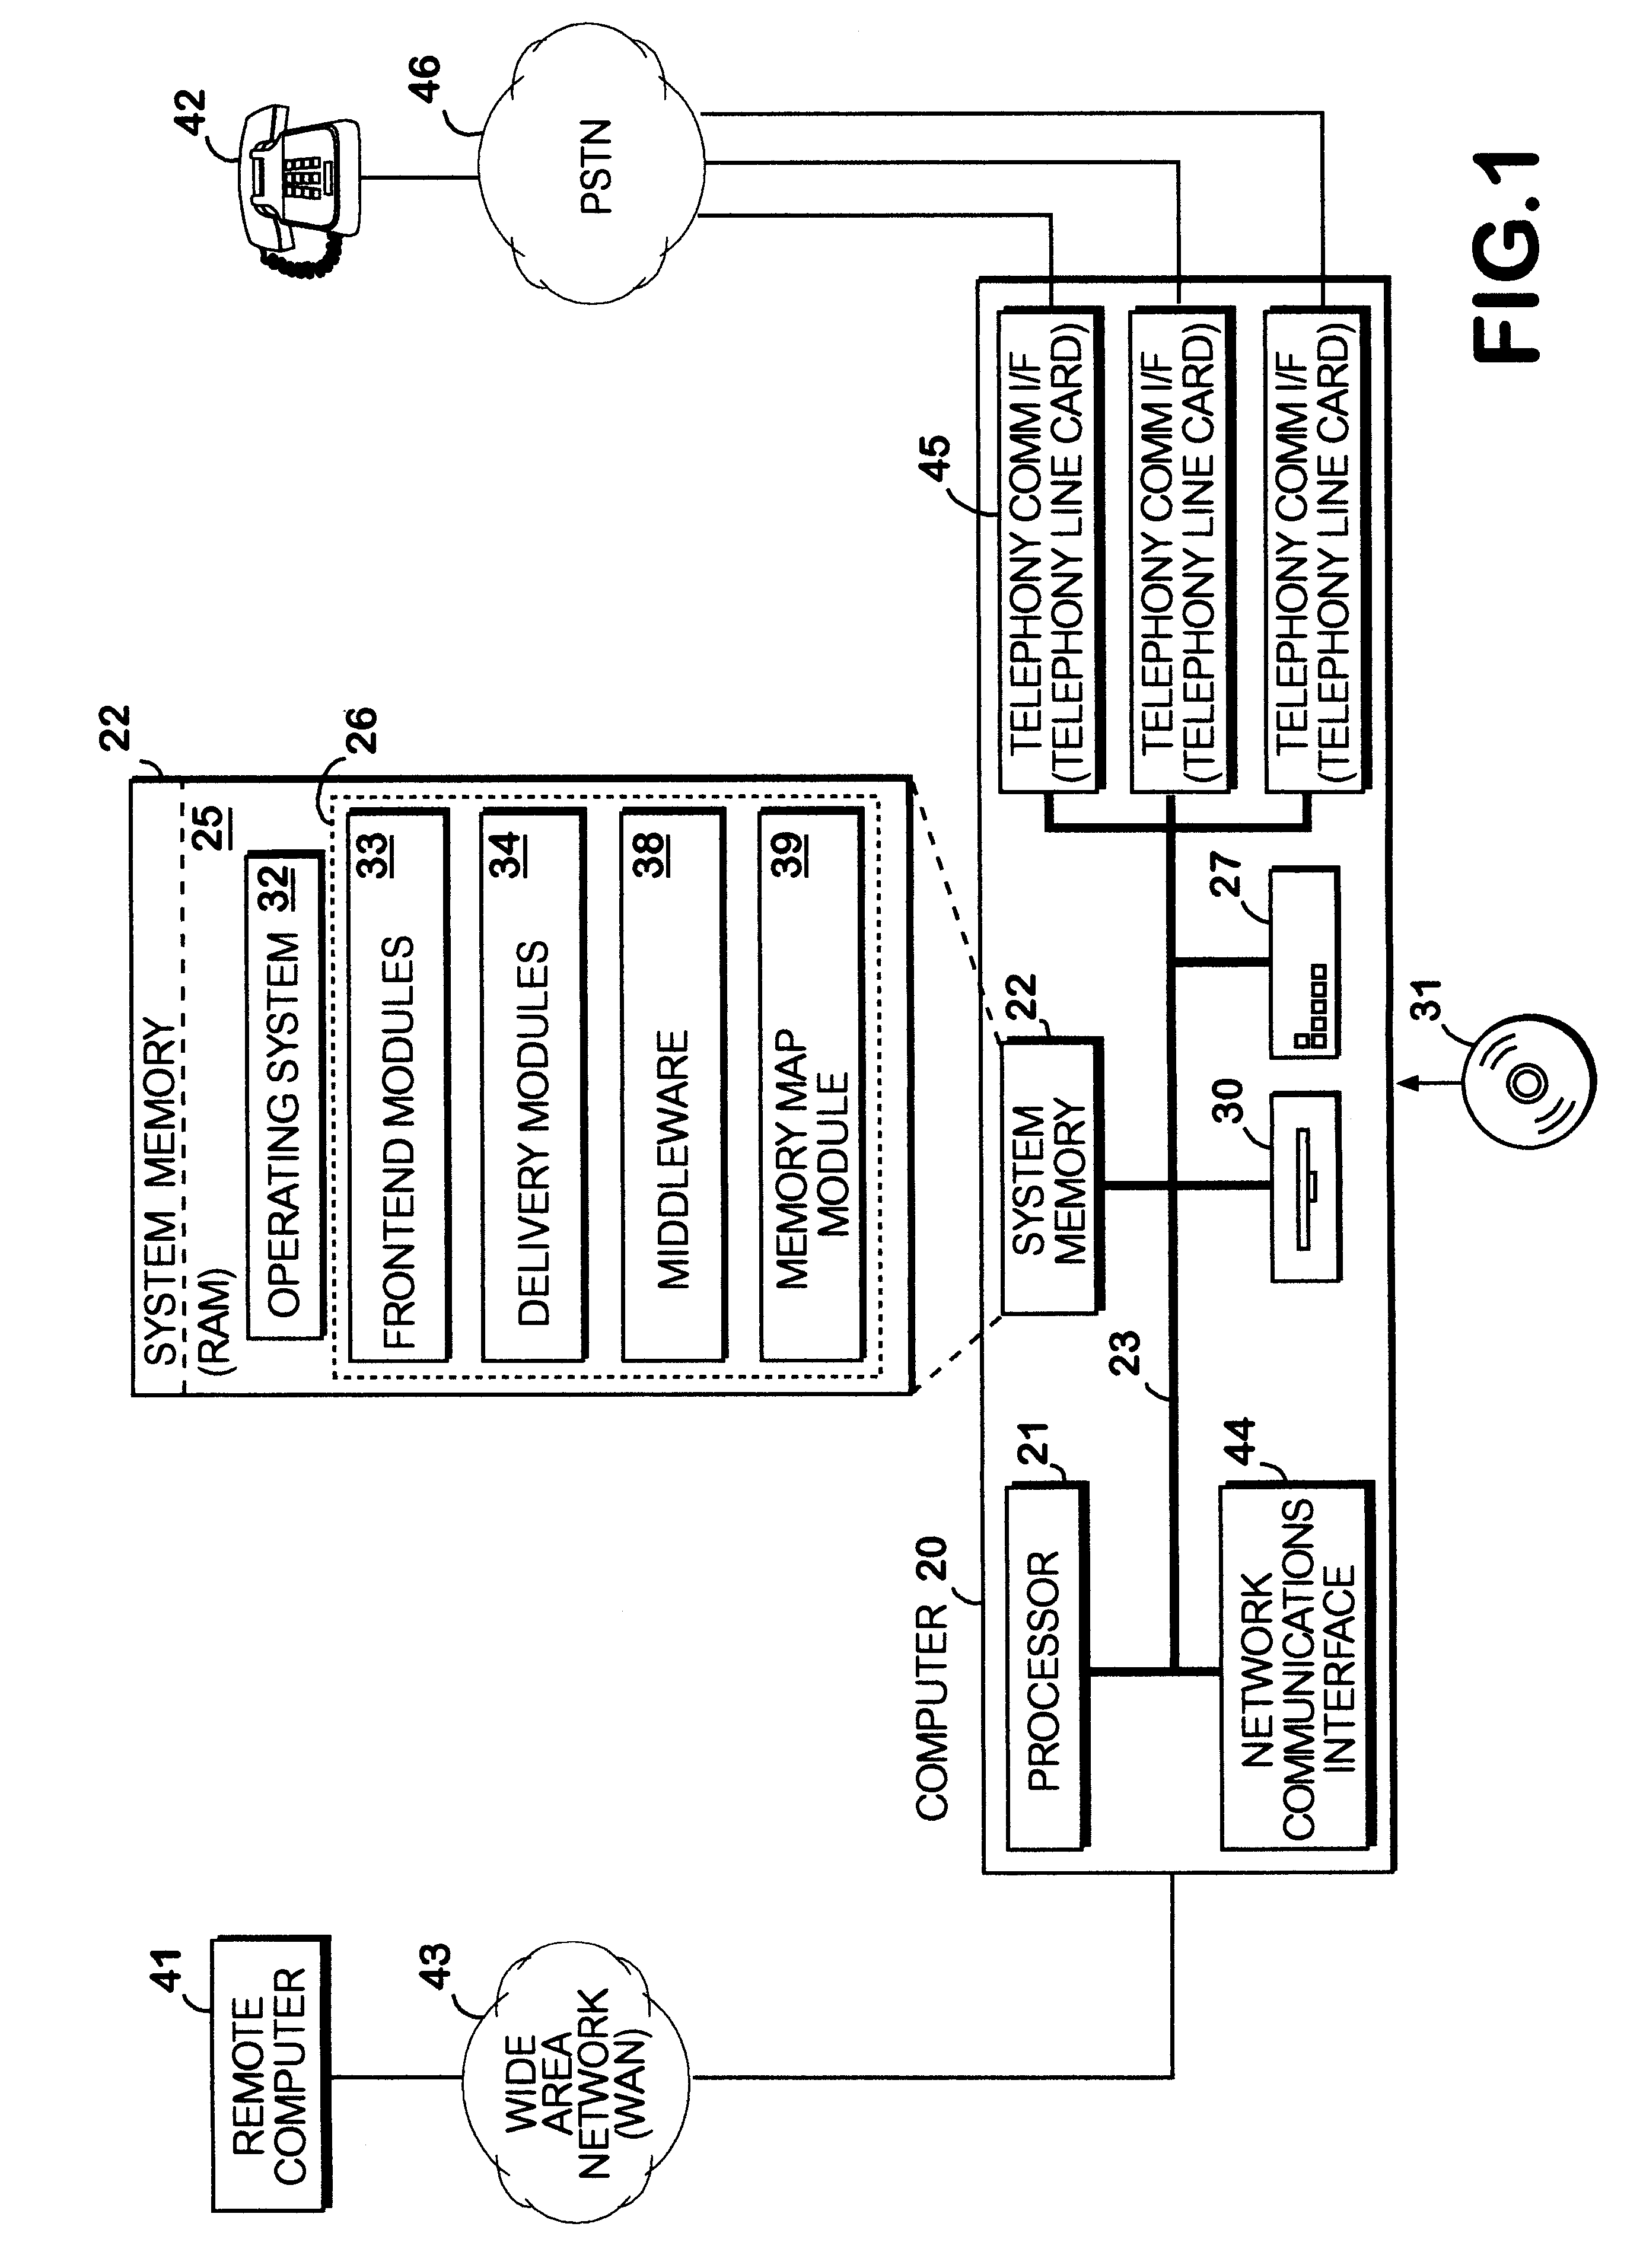 Method and system for processing a memory map to provide listing information representing data within a database